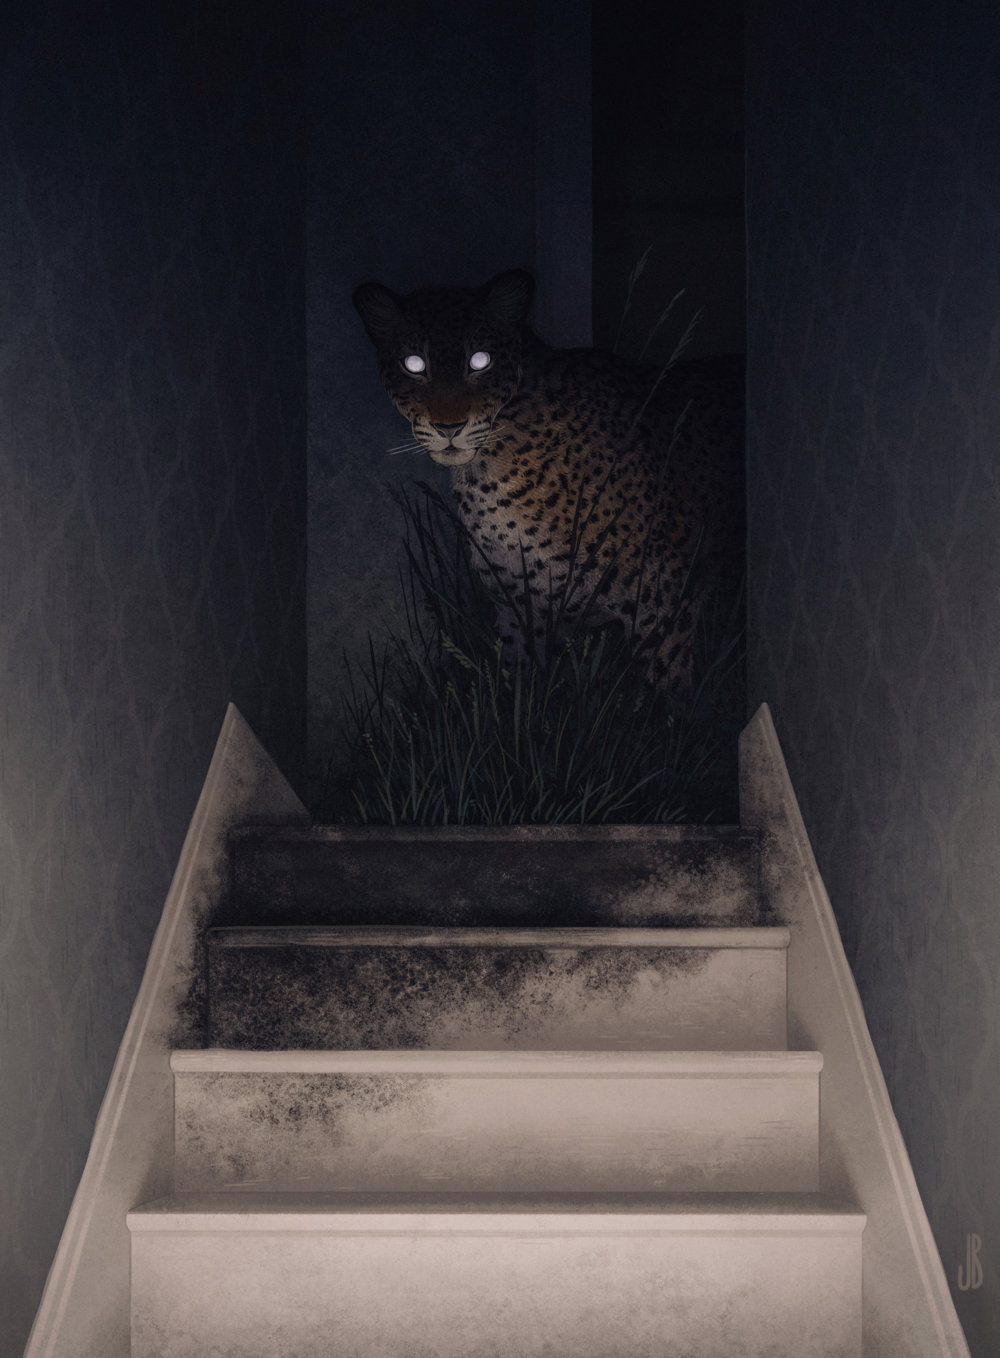 Mysterious And Shadowy Animal Illustrations By Jenna Barton 1